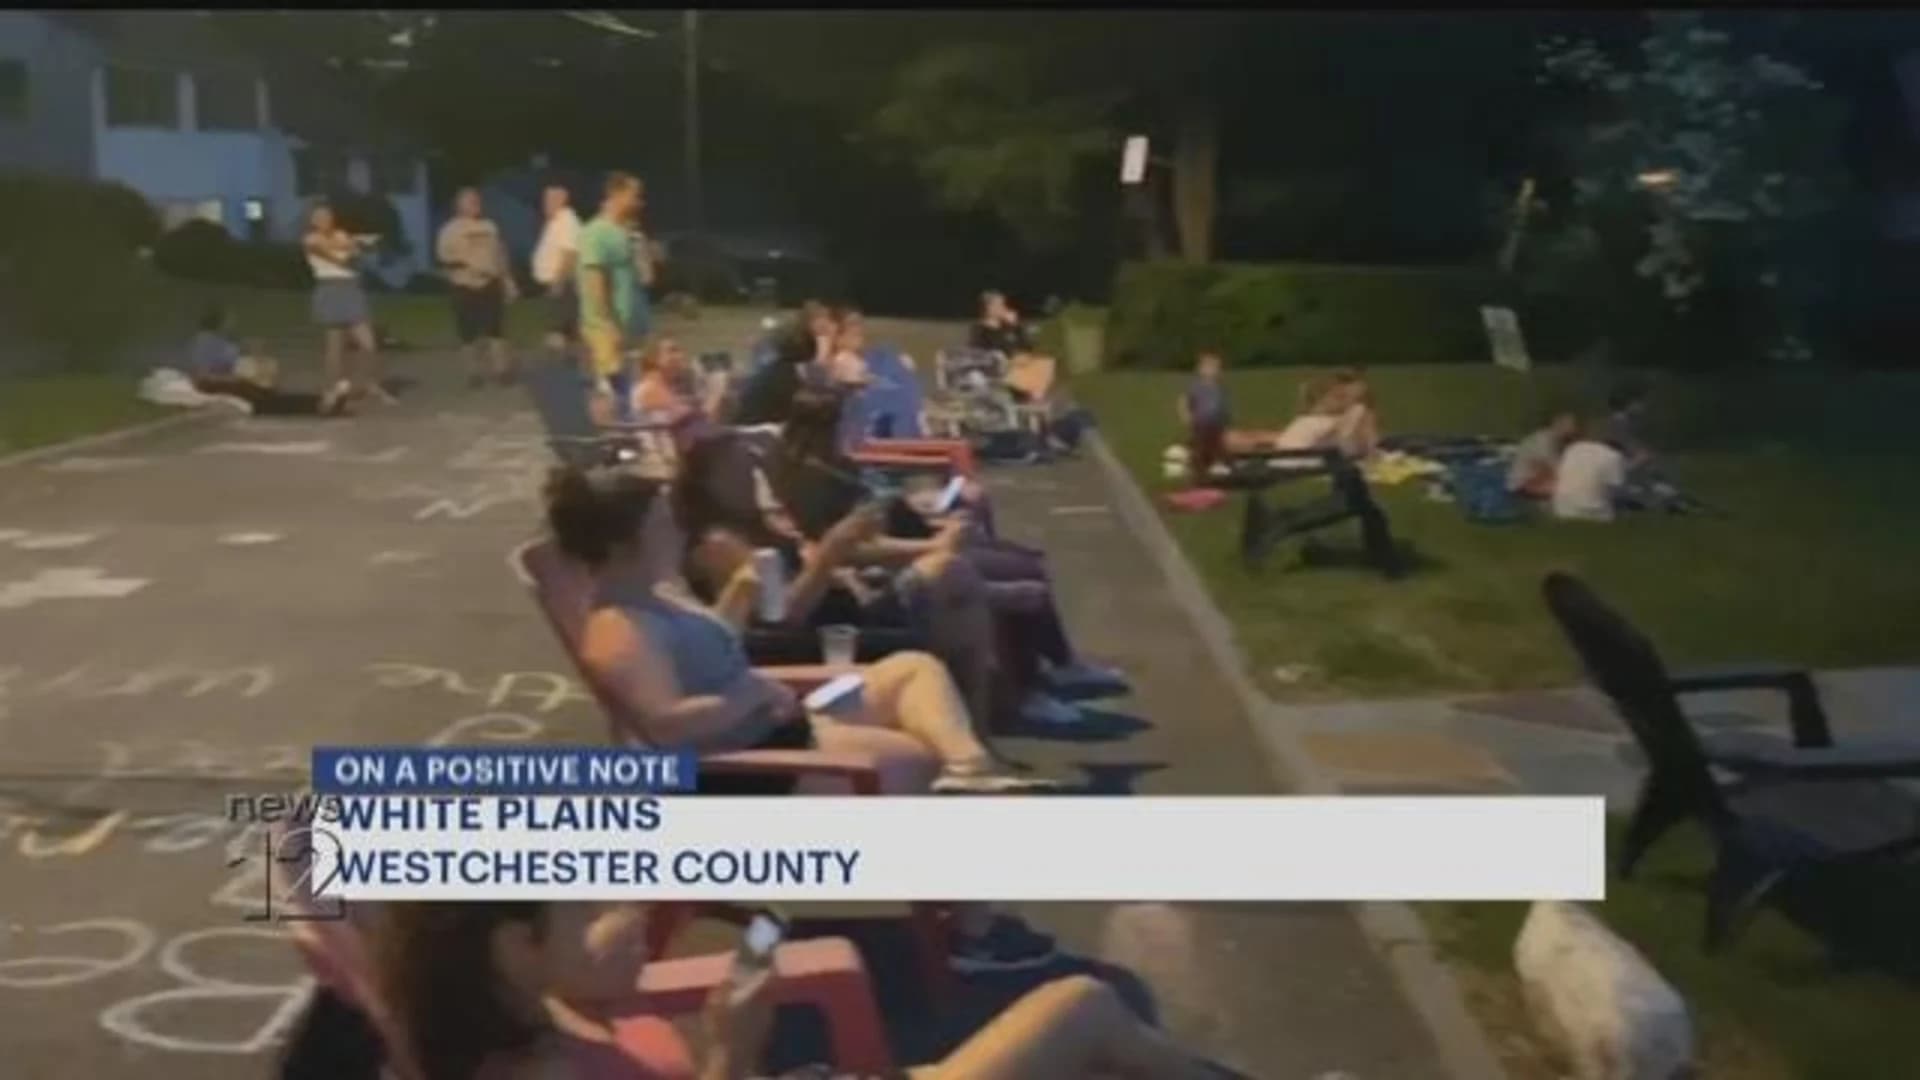 White Plains residents hold outdoor movie night